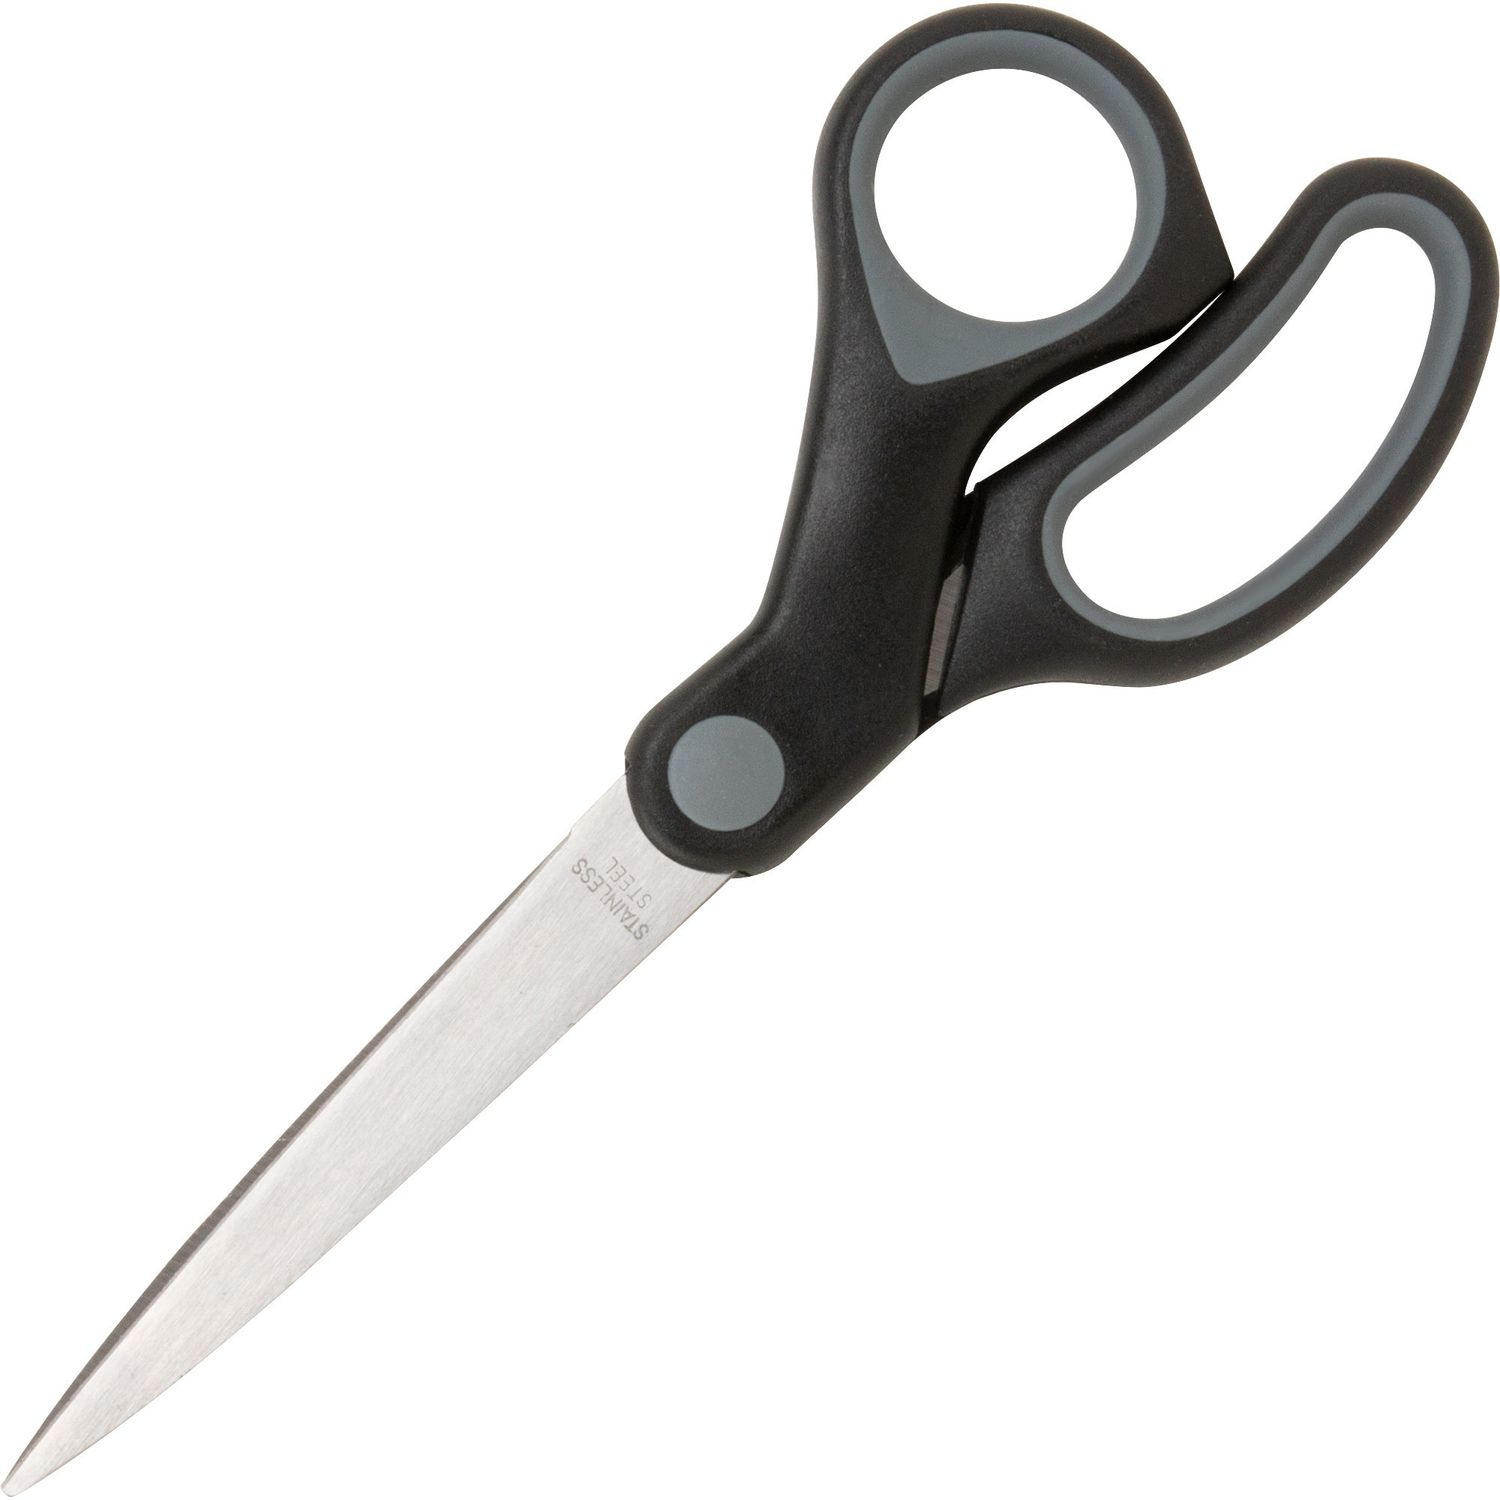 Straight Rubber Handle Scissors 8" Overall Length, Straight, Stainless Steel, Black, Gray, 1 Each